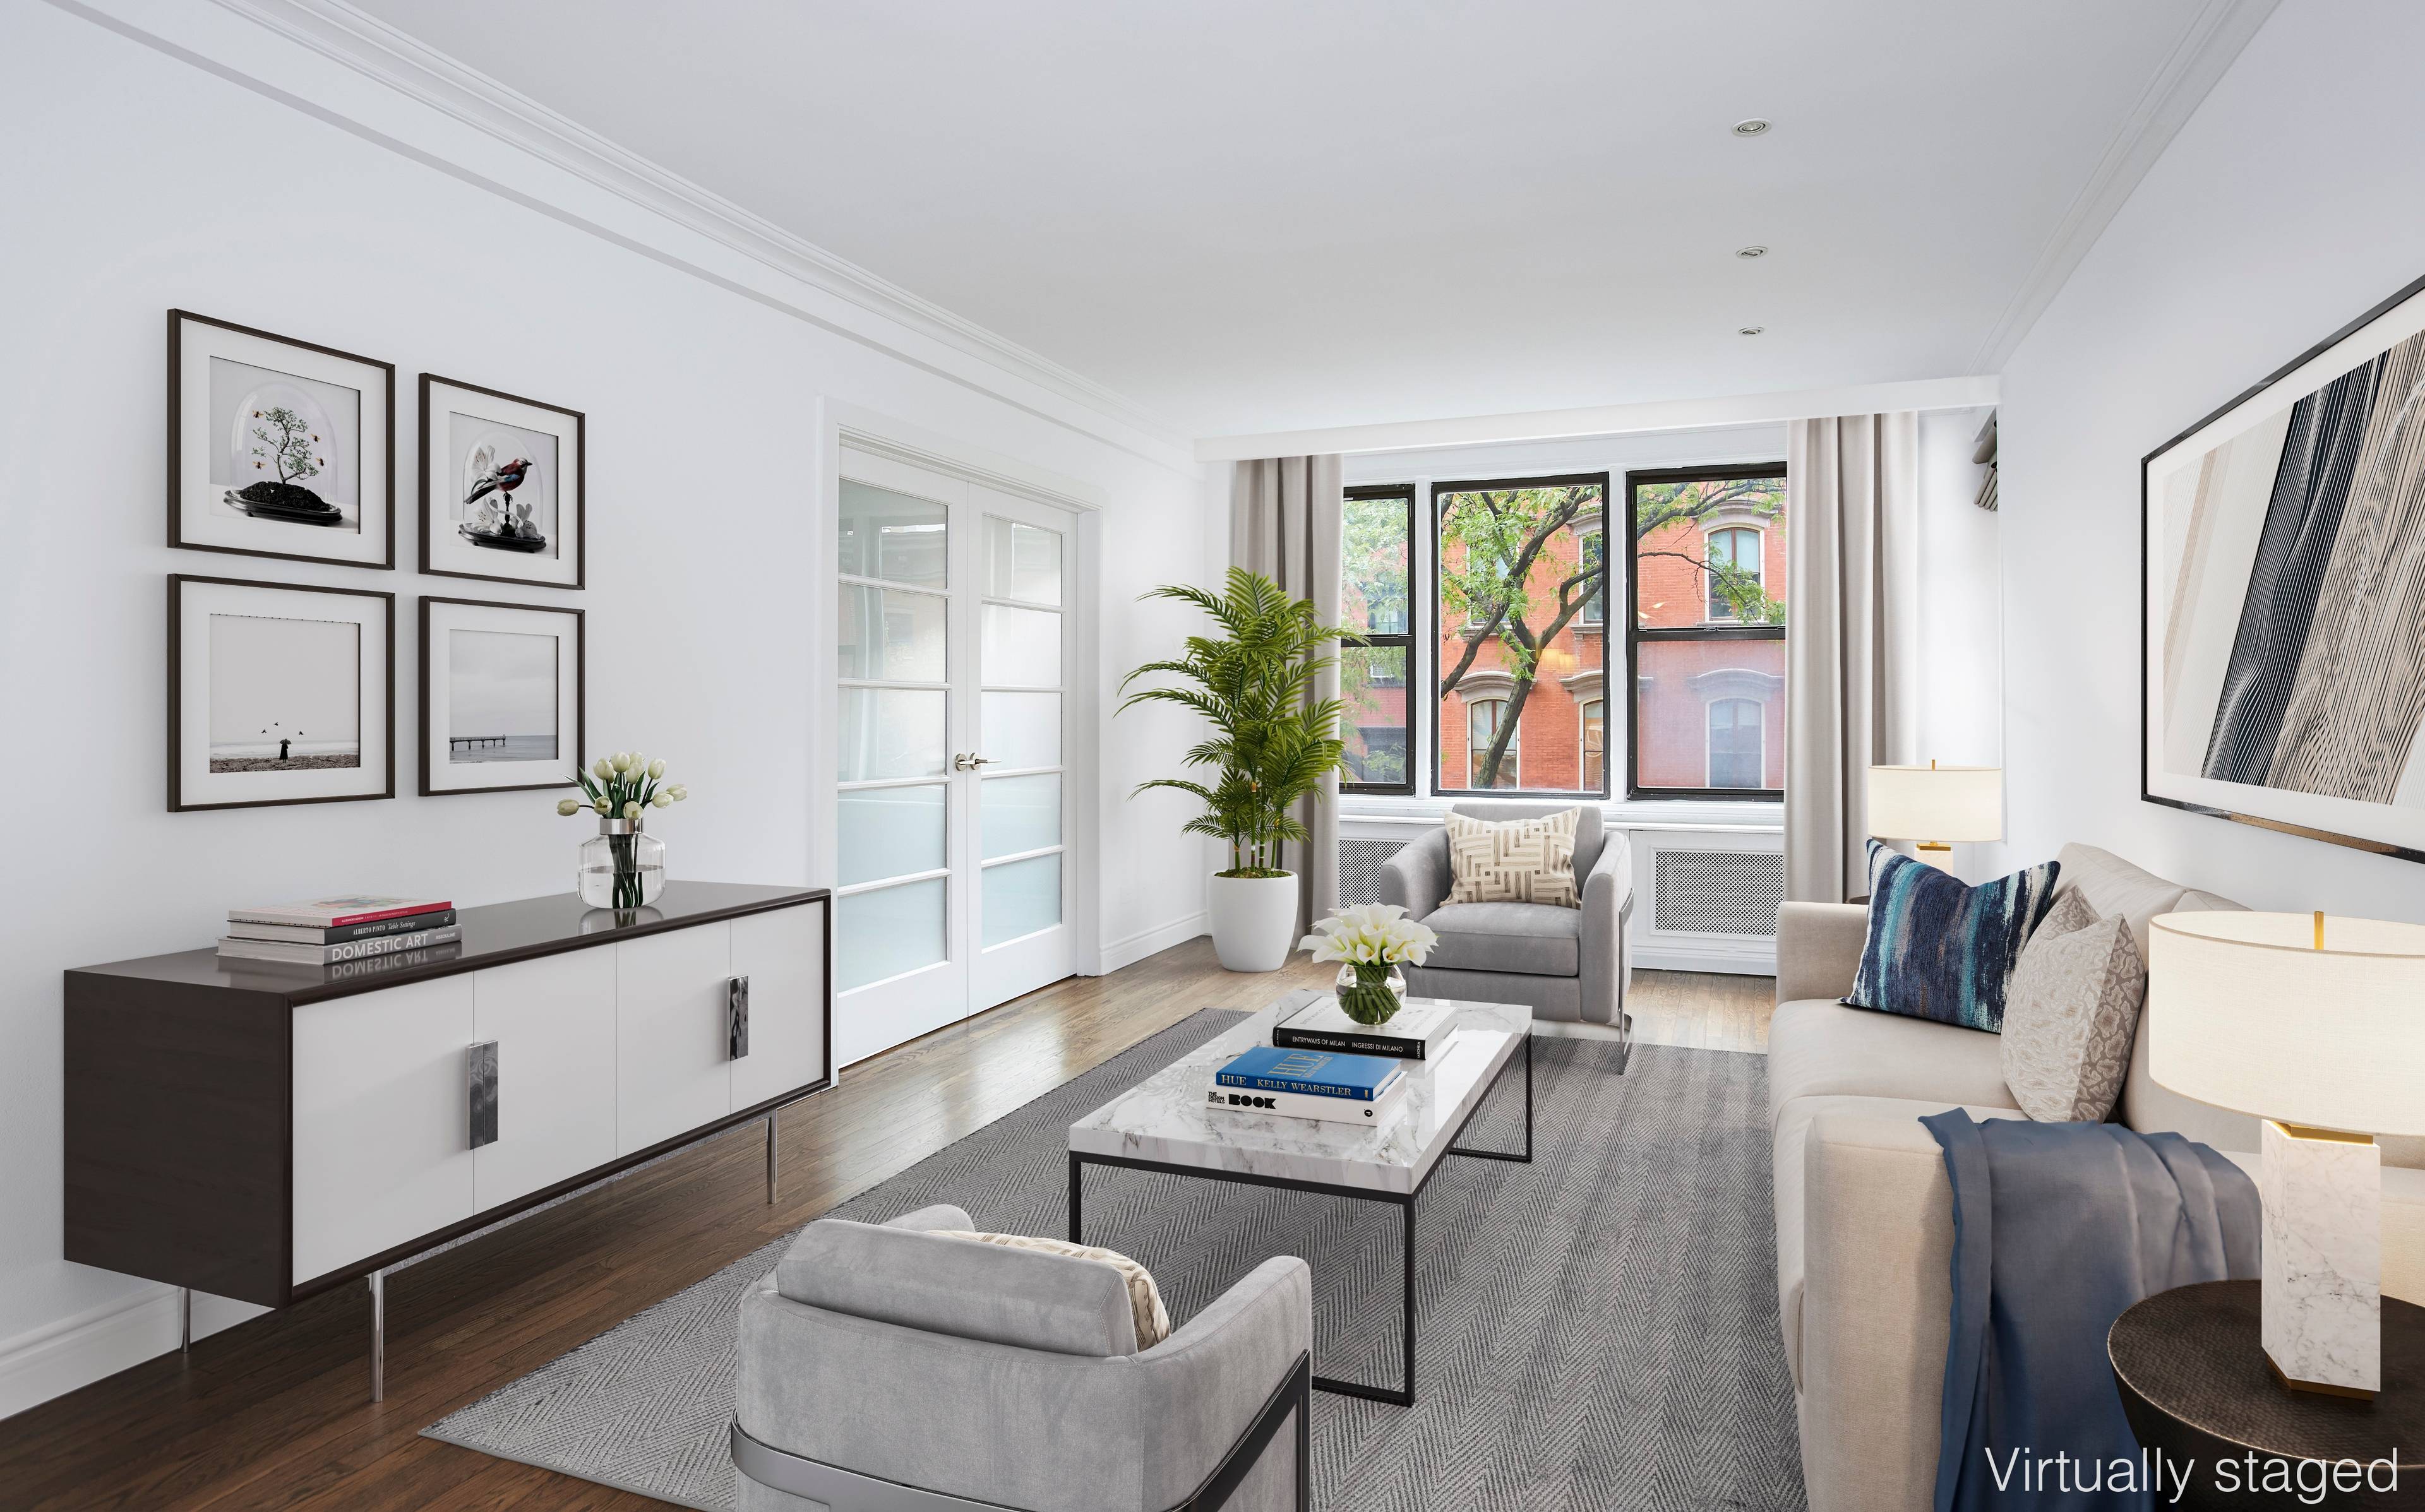 LIGHT AND BRIGHT 2 BEDROOM BEAUTY IN GRAMERCY Recently renovated architecturally designed Mint 2 Bedroom 1 Bath on one of Gramercy's most beautiful tree lined blocks.